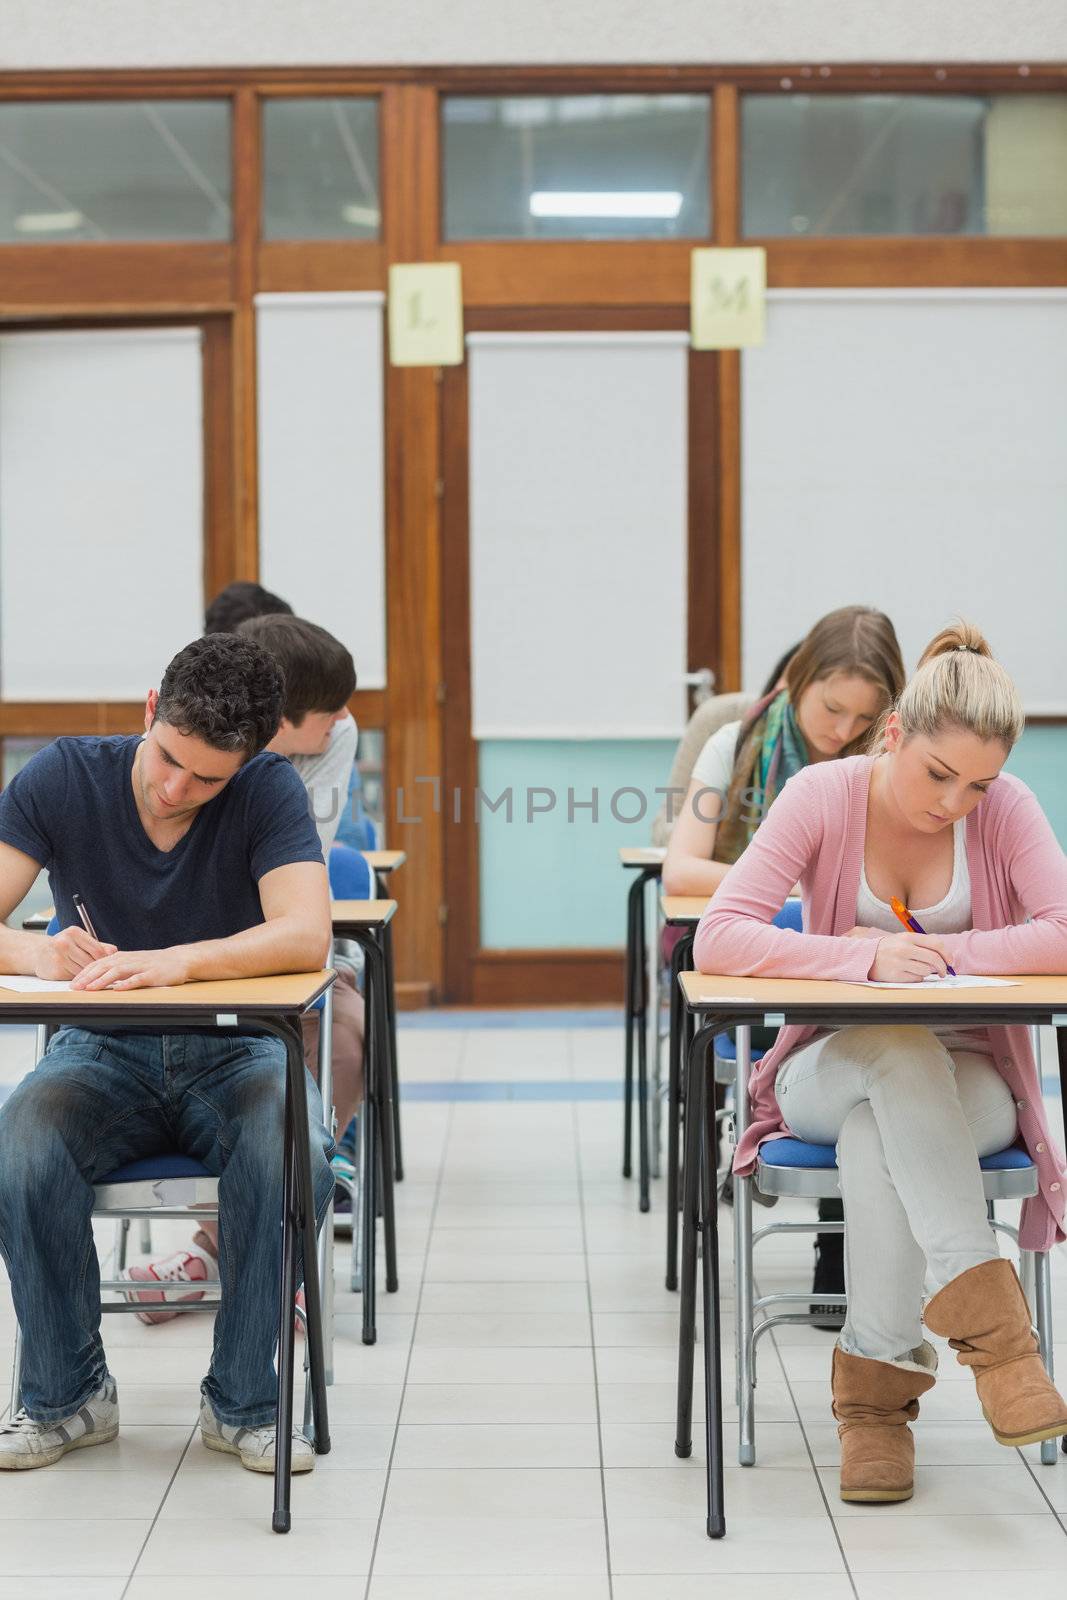 Students sitting an exam in college